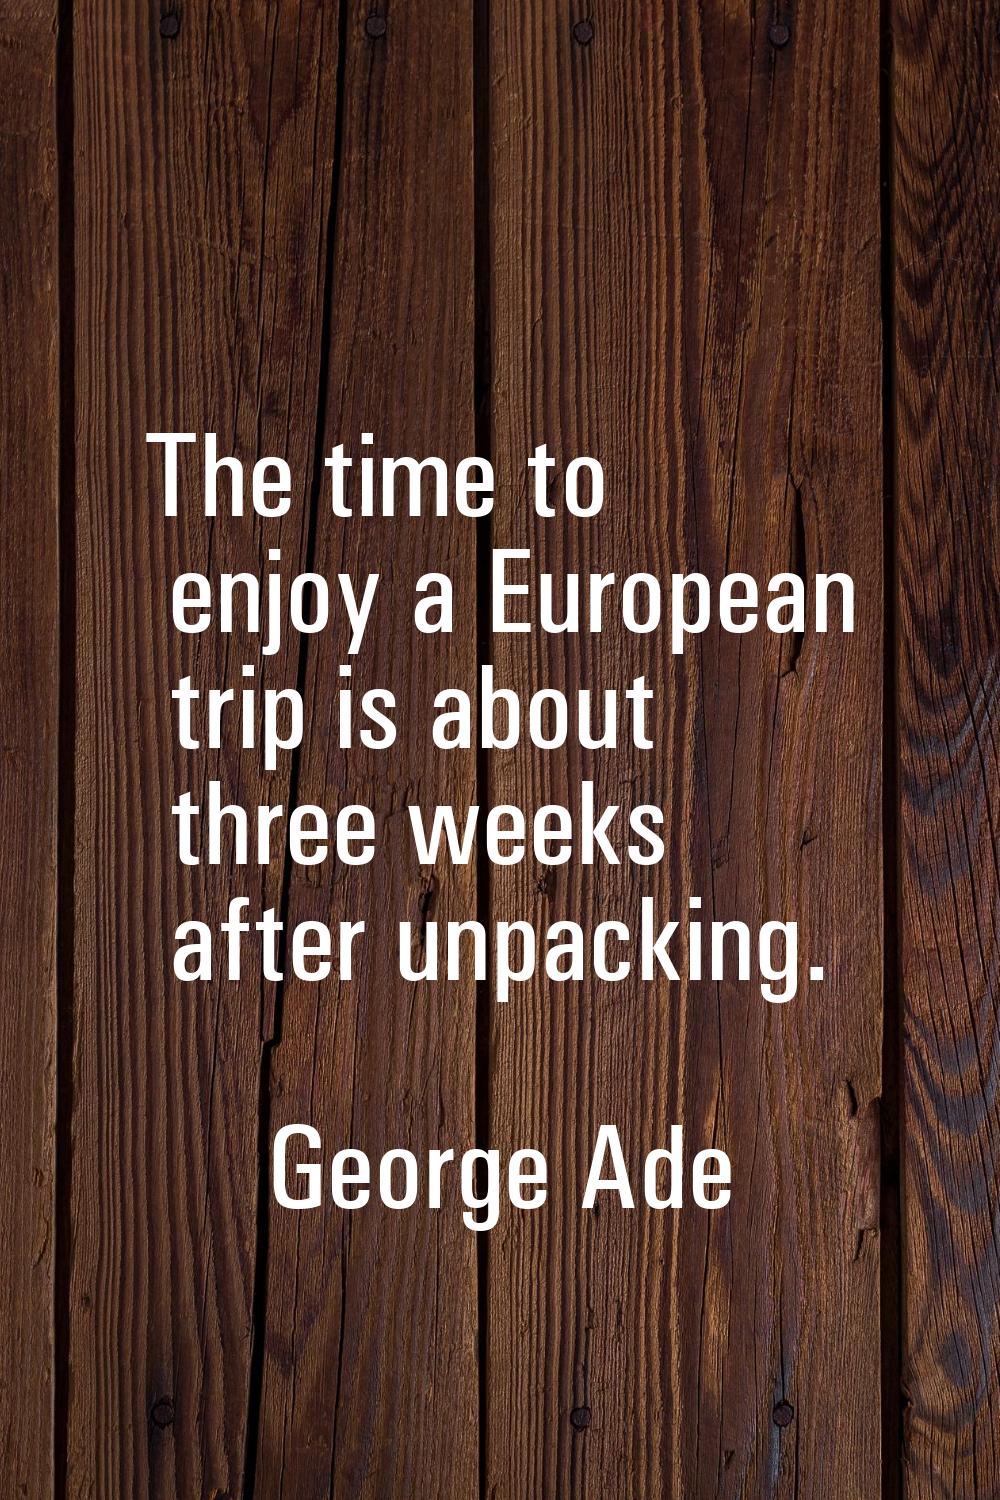 The time to enjoy a European trip is about three weeks after unpacking.